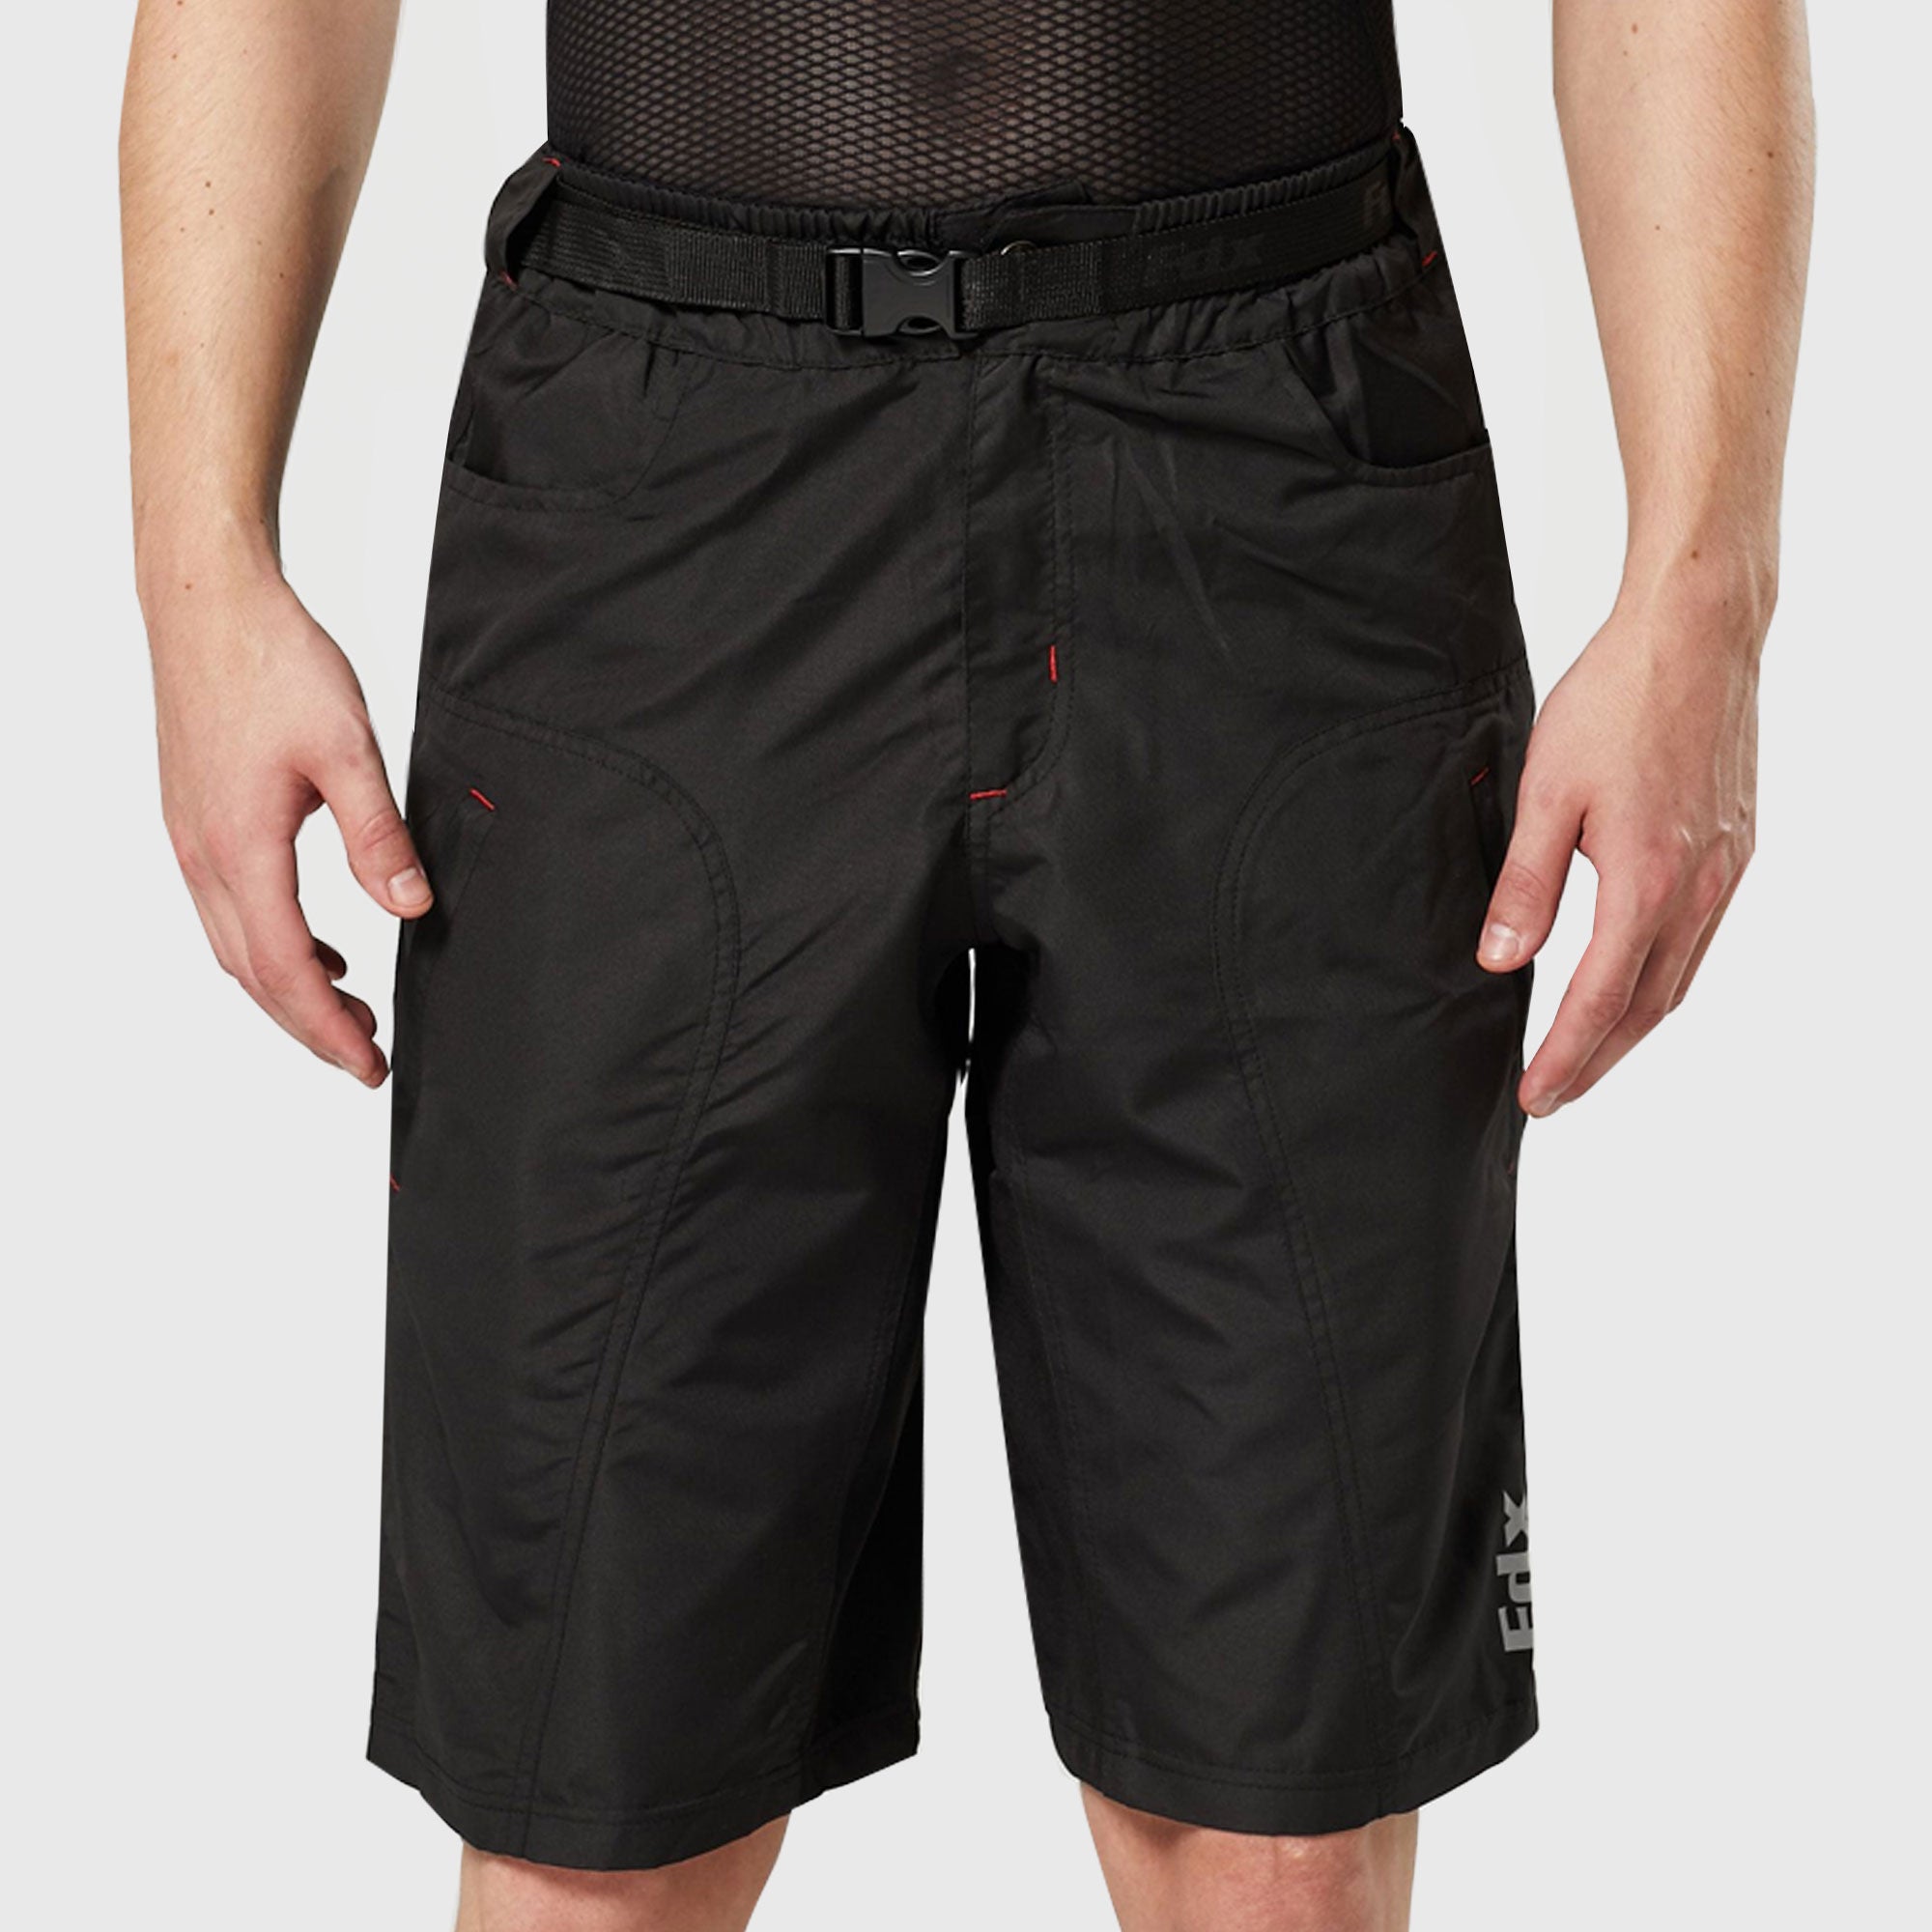 Men’s Black MTB Shorts, Lightweight Mountain Bike Shorts with Removable Padded Liner, Breathable Quick Dry Outdoor Cycle Pants with Cargo Pockets